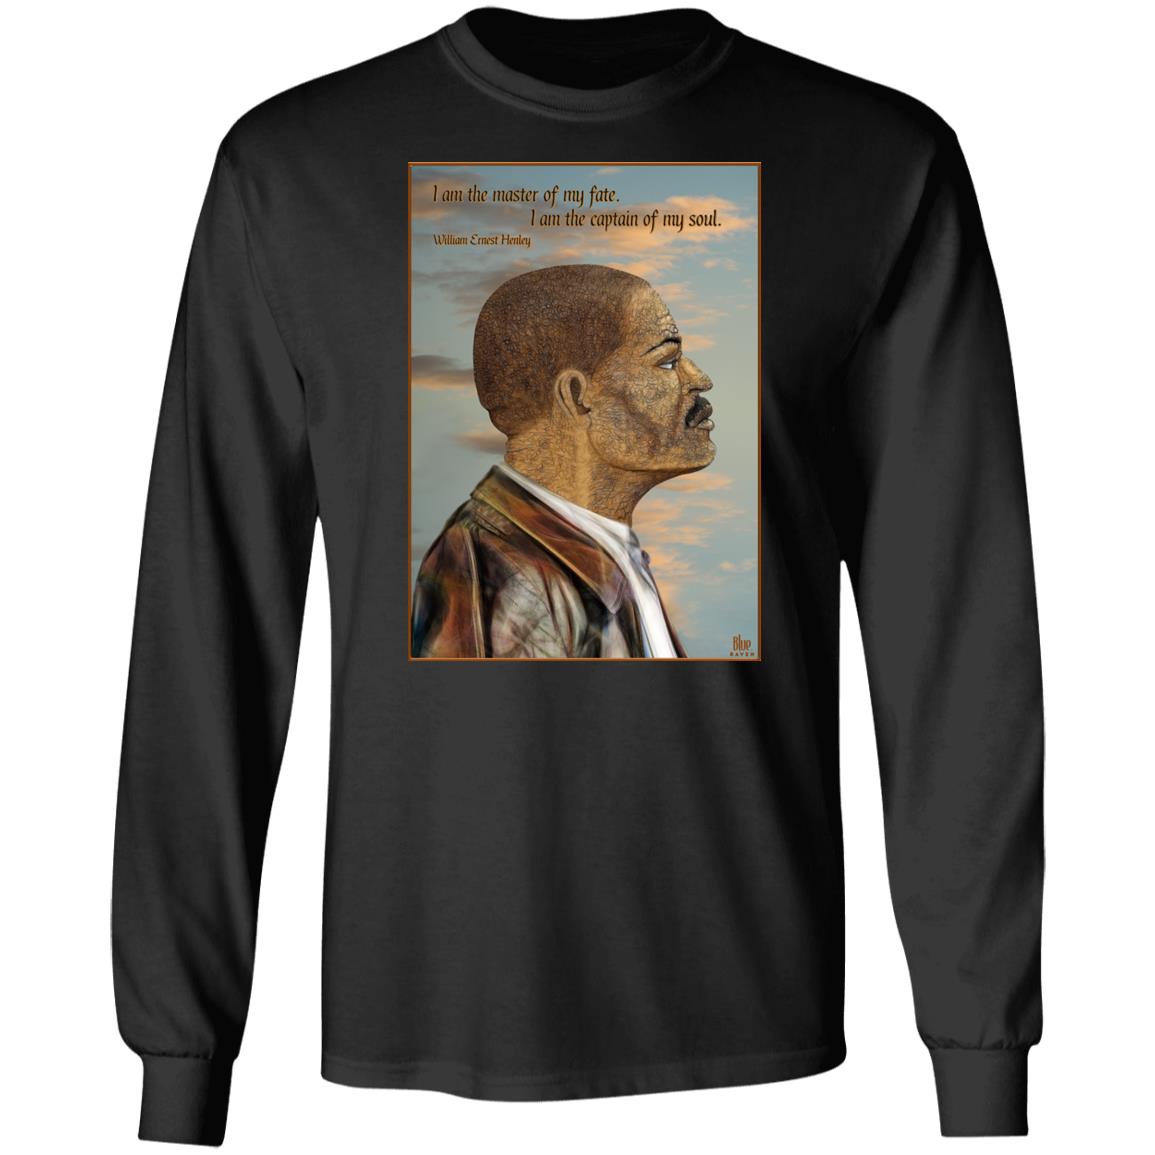 Master Of My Fate - Men's Long Sleeve T-Shirt